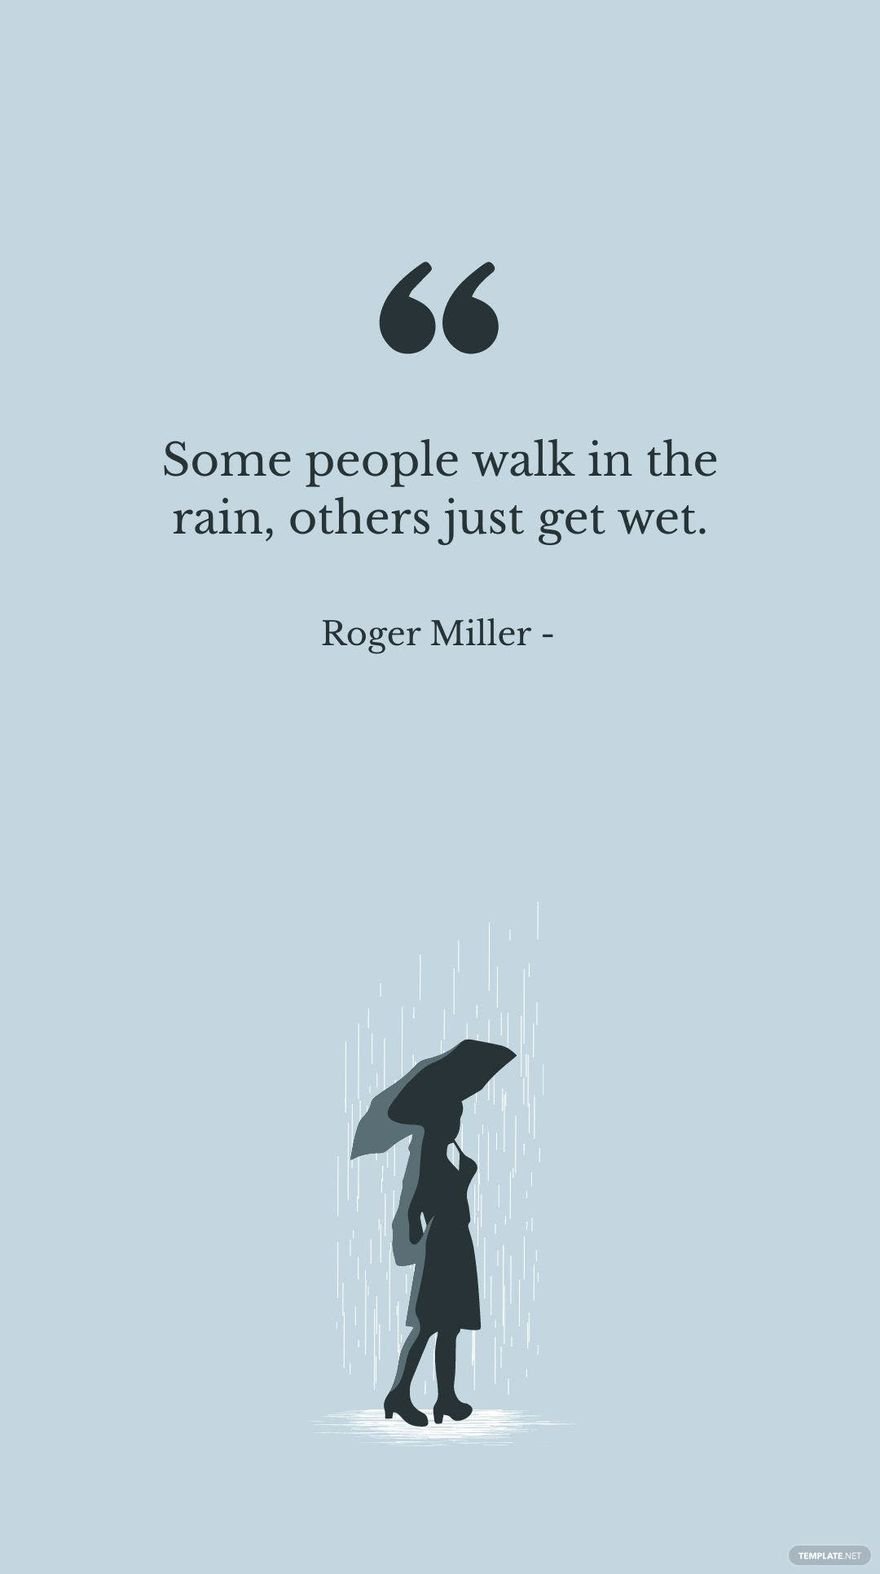 Roger Miller - Some people walk in the rain, others just get wet.